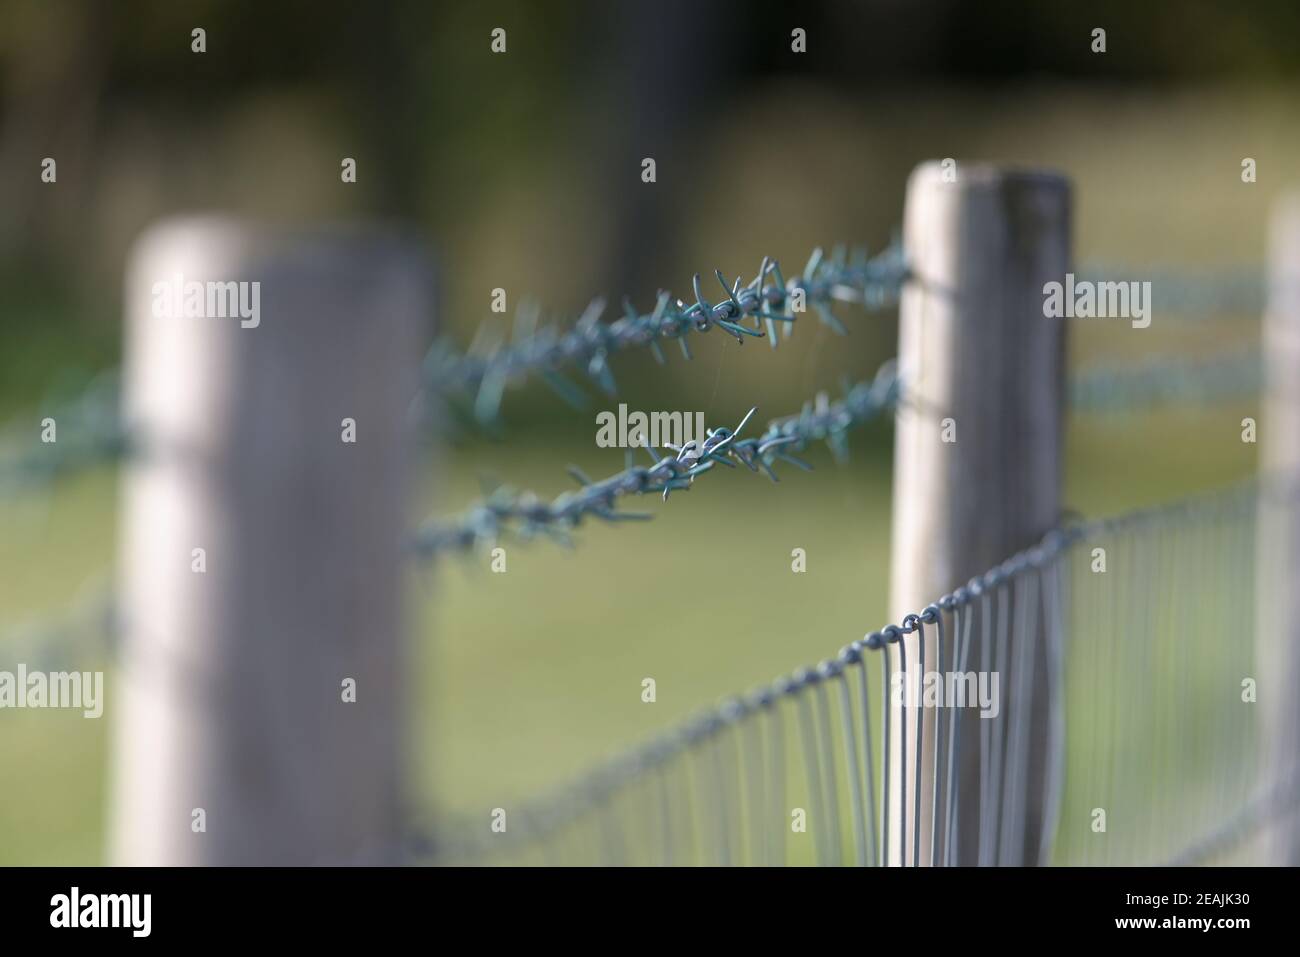 Selective focus image of freshly made double barbed wire fence. Stock Photo